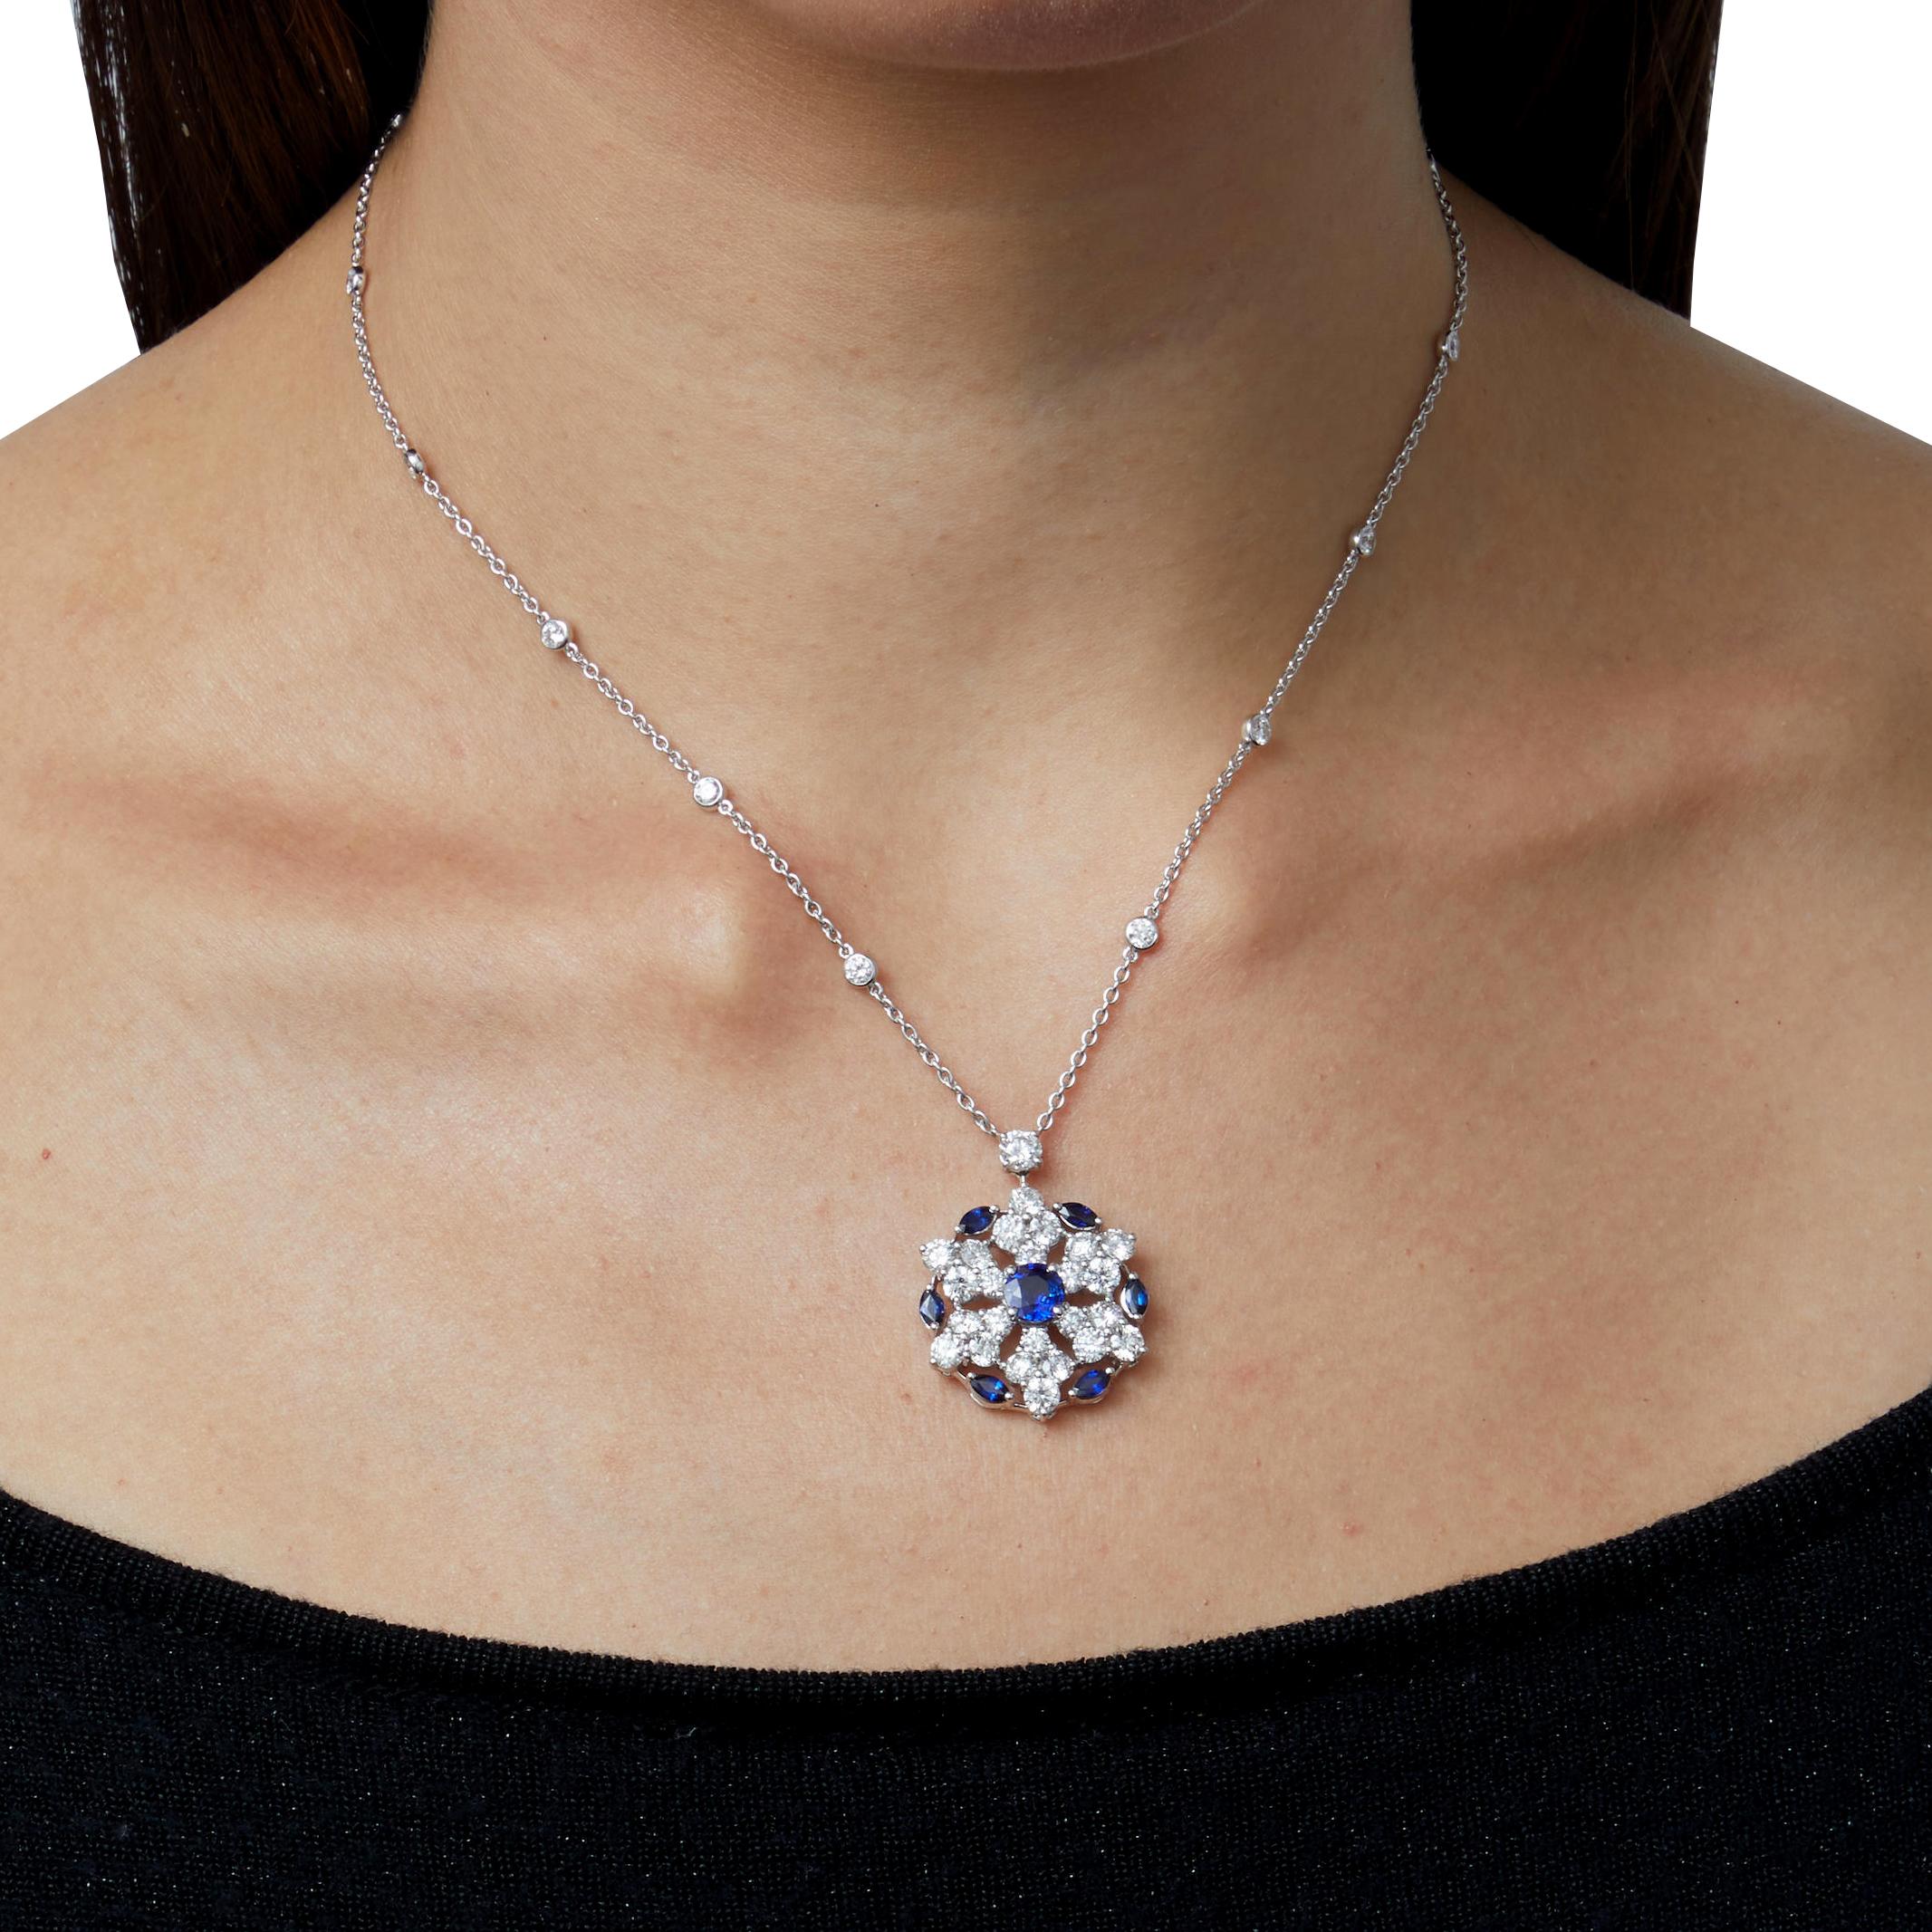 A whimsical pendant necklace by Graff showcasing 5.10ct of the finest round brilliant cut diamonds with 1.80ct of sapphires mounted in 18k white gold. The necklace has a total length of 16